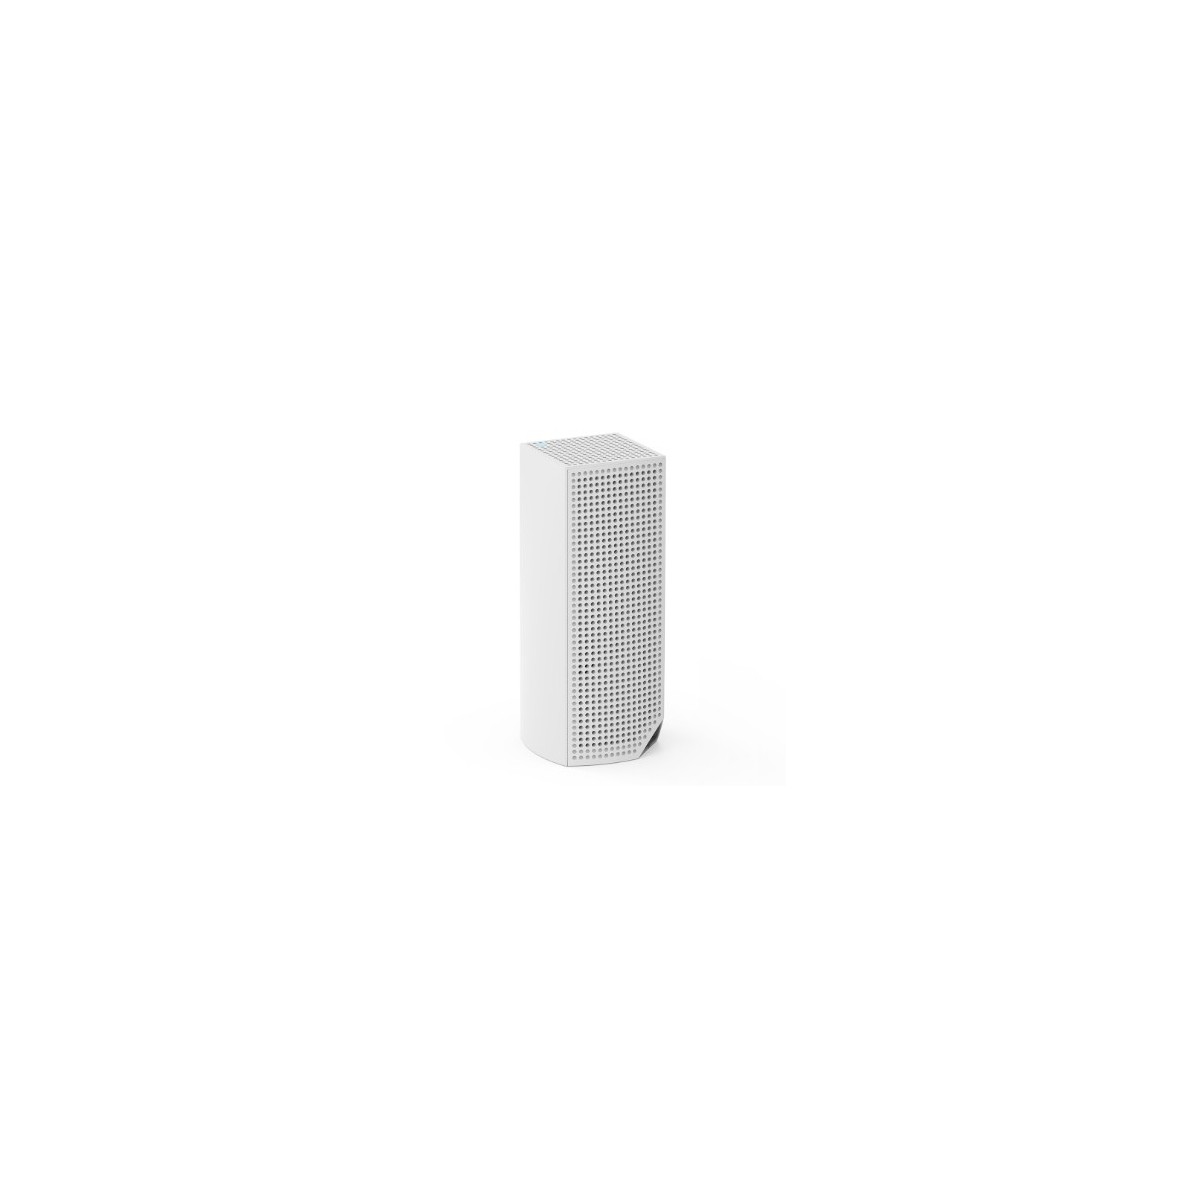 Linksys Velop Whole Home Mesh Wi-Fi System (Pack of 2) - 867 Mbit/s - 867 Mbit/s - 1000 Mbit/s - IEEE 802.11a,IEEE 802.11ac,IEEE